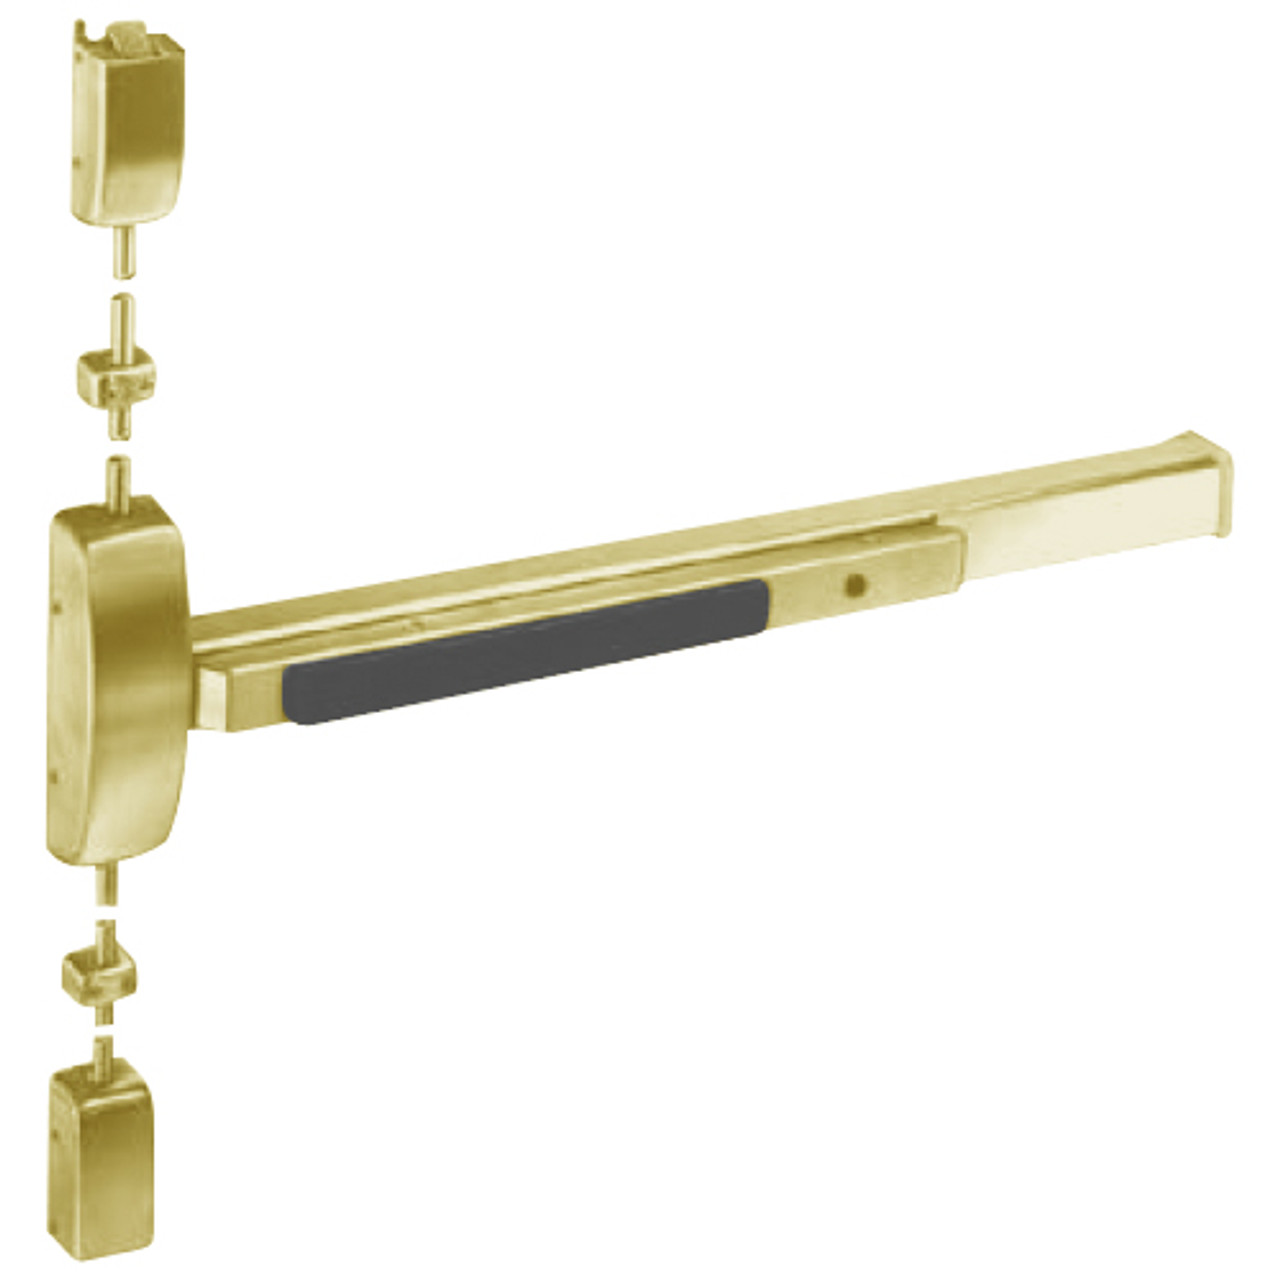 8710J-RHR-03 Sargent 80 Series Exit Only Surface Vertical Rod Exit Device in Bright Brass